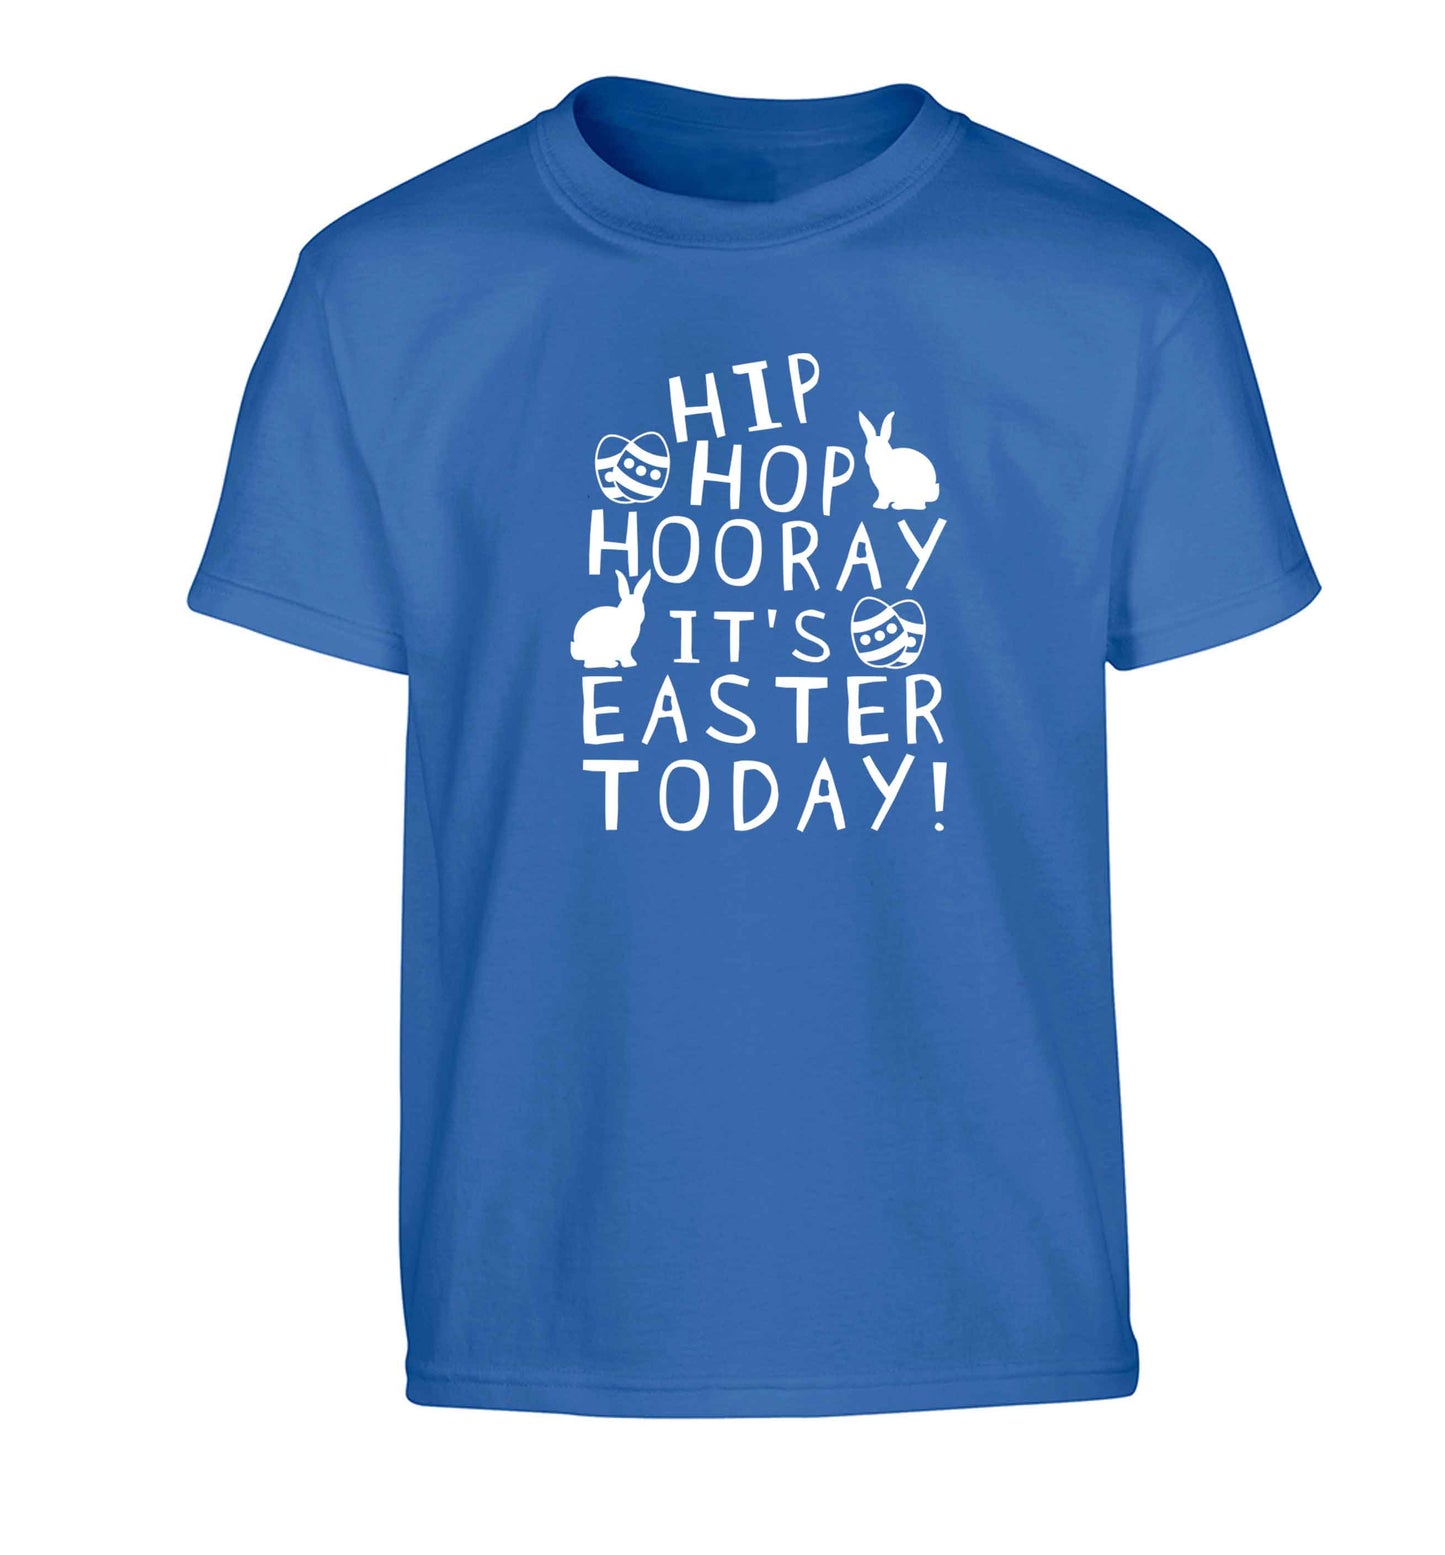 Hip hip hooray it's Easter today! Children's blue Tshirt 12-13 Years